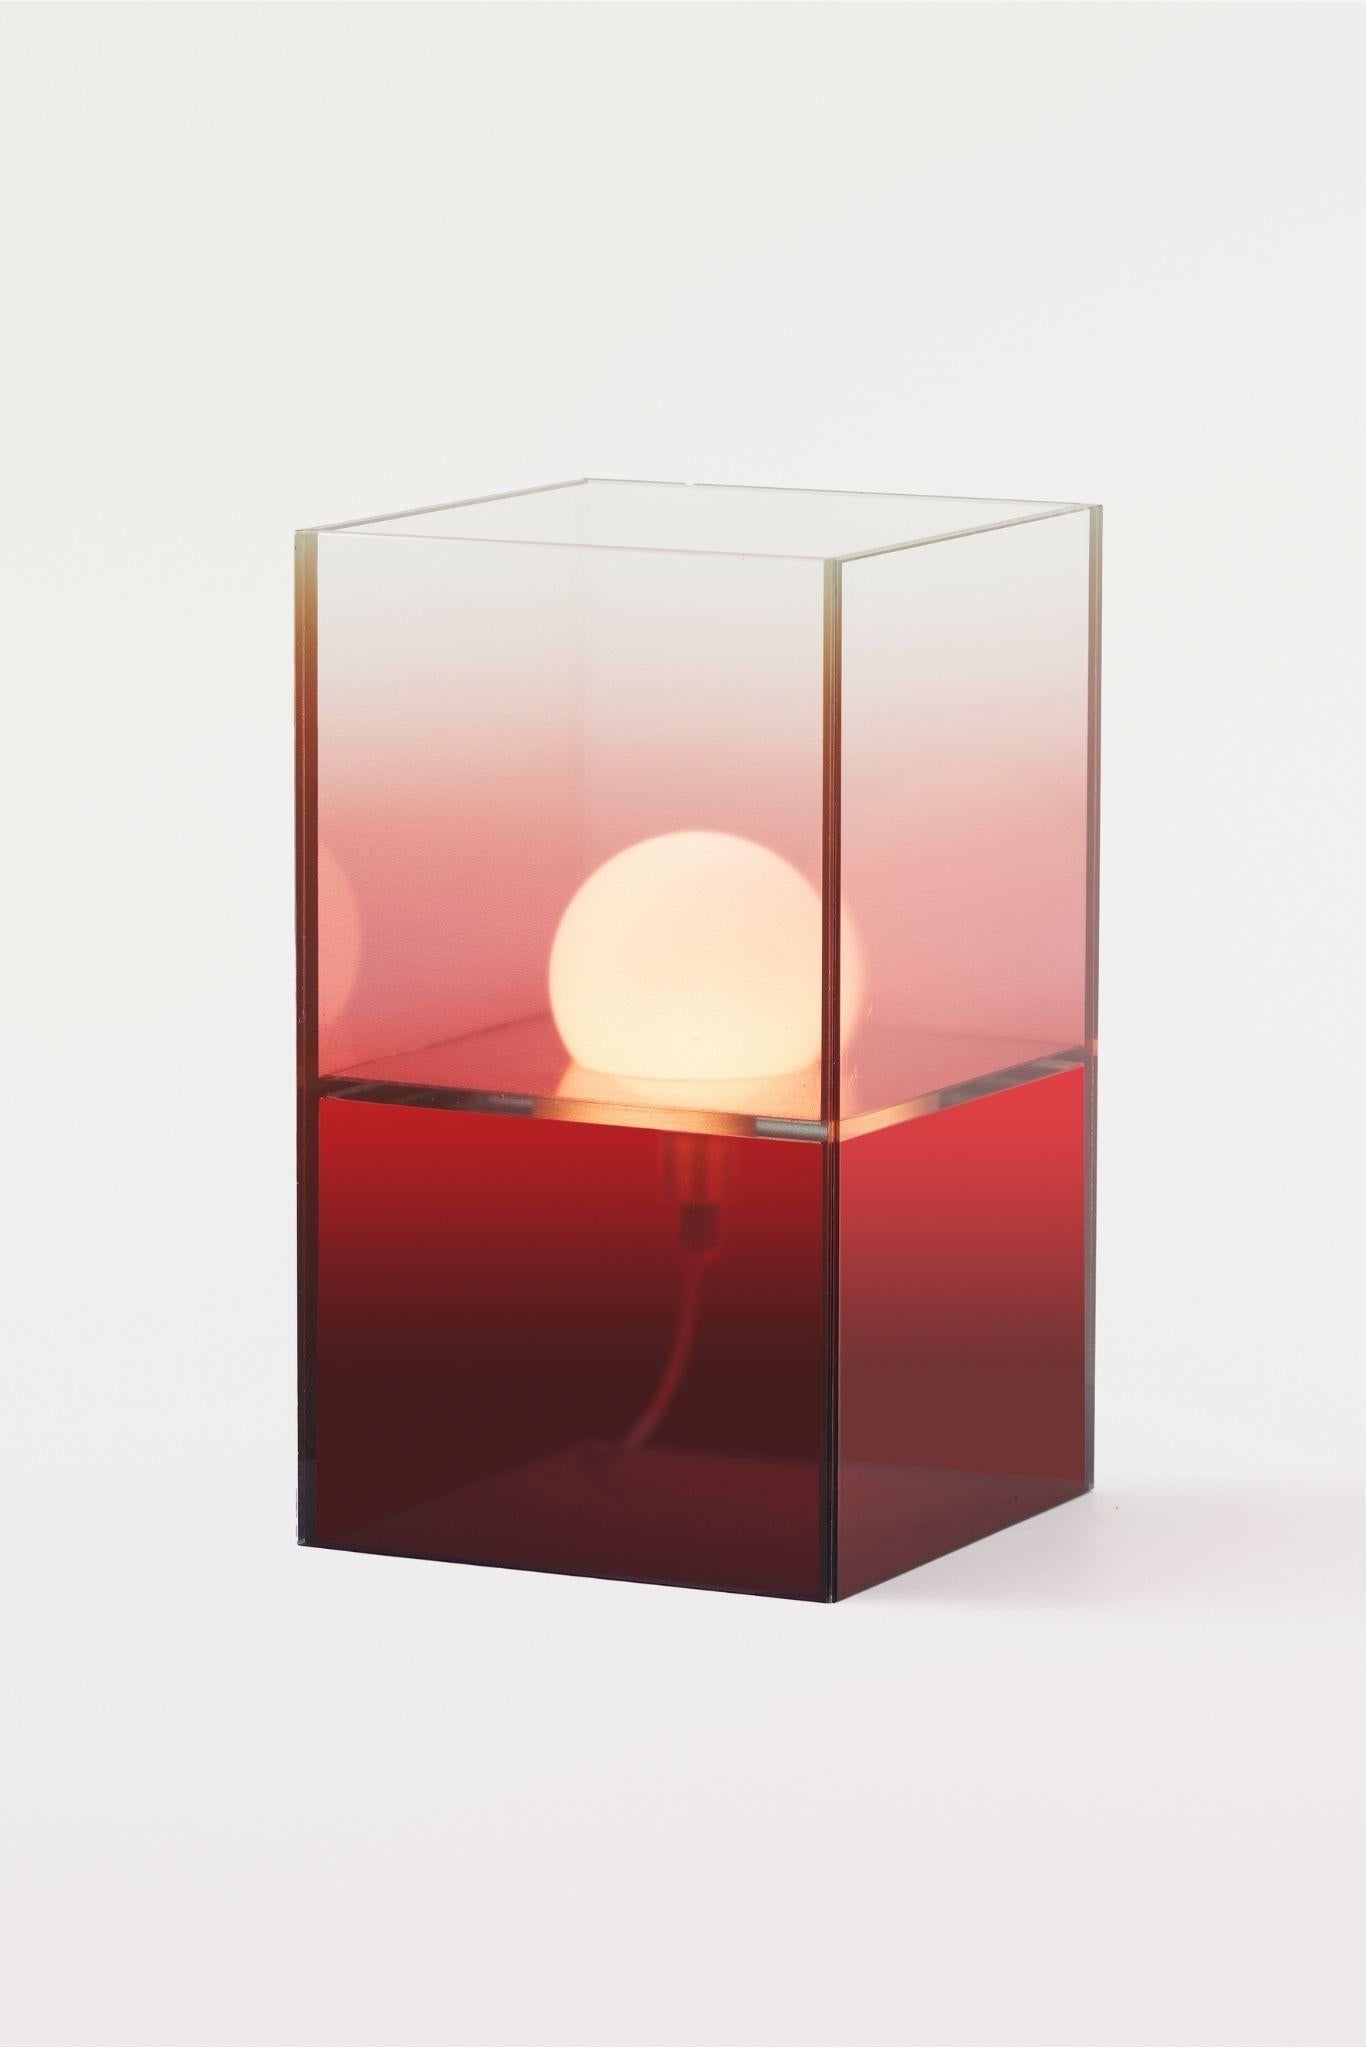 Inspired by the breathtaking beauty of a radiant sunset, this lamp embraces the rich and alluring shades of red, transitioning seamlessly from deep crimson to vibrant scarlet. Let its captivating colors and radiant glow infuse your surroundings with